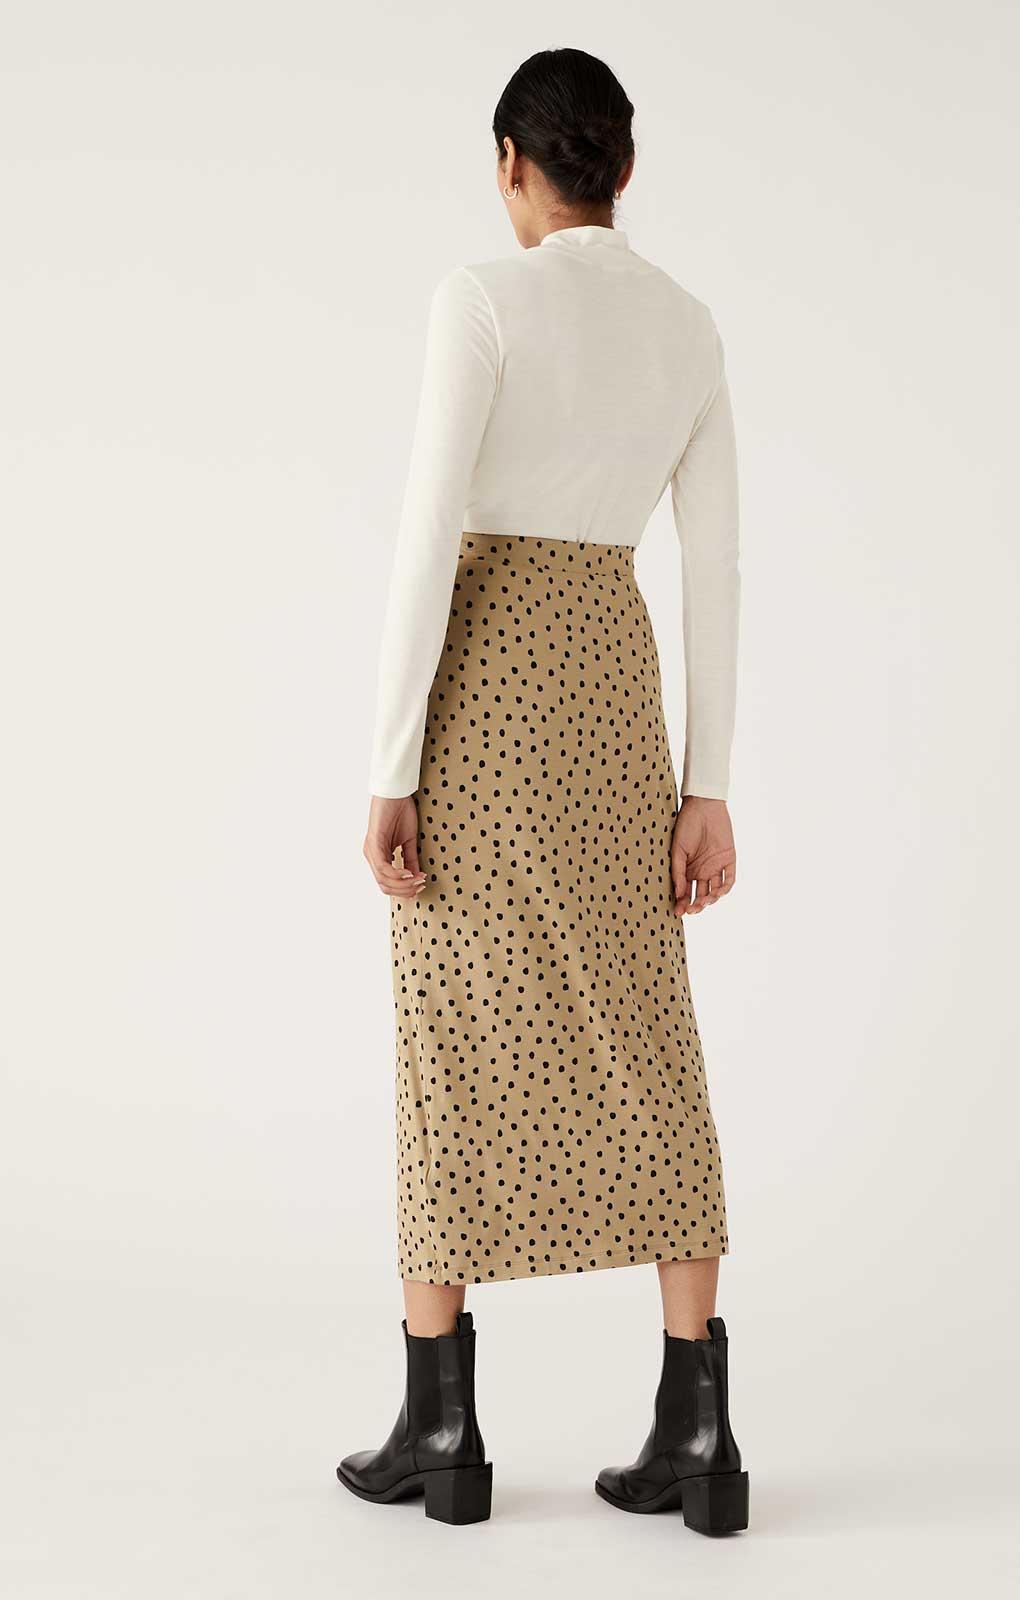 M&S Jersey Animal Print Maxi A-Line Skirt product image